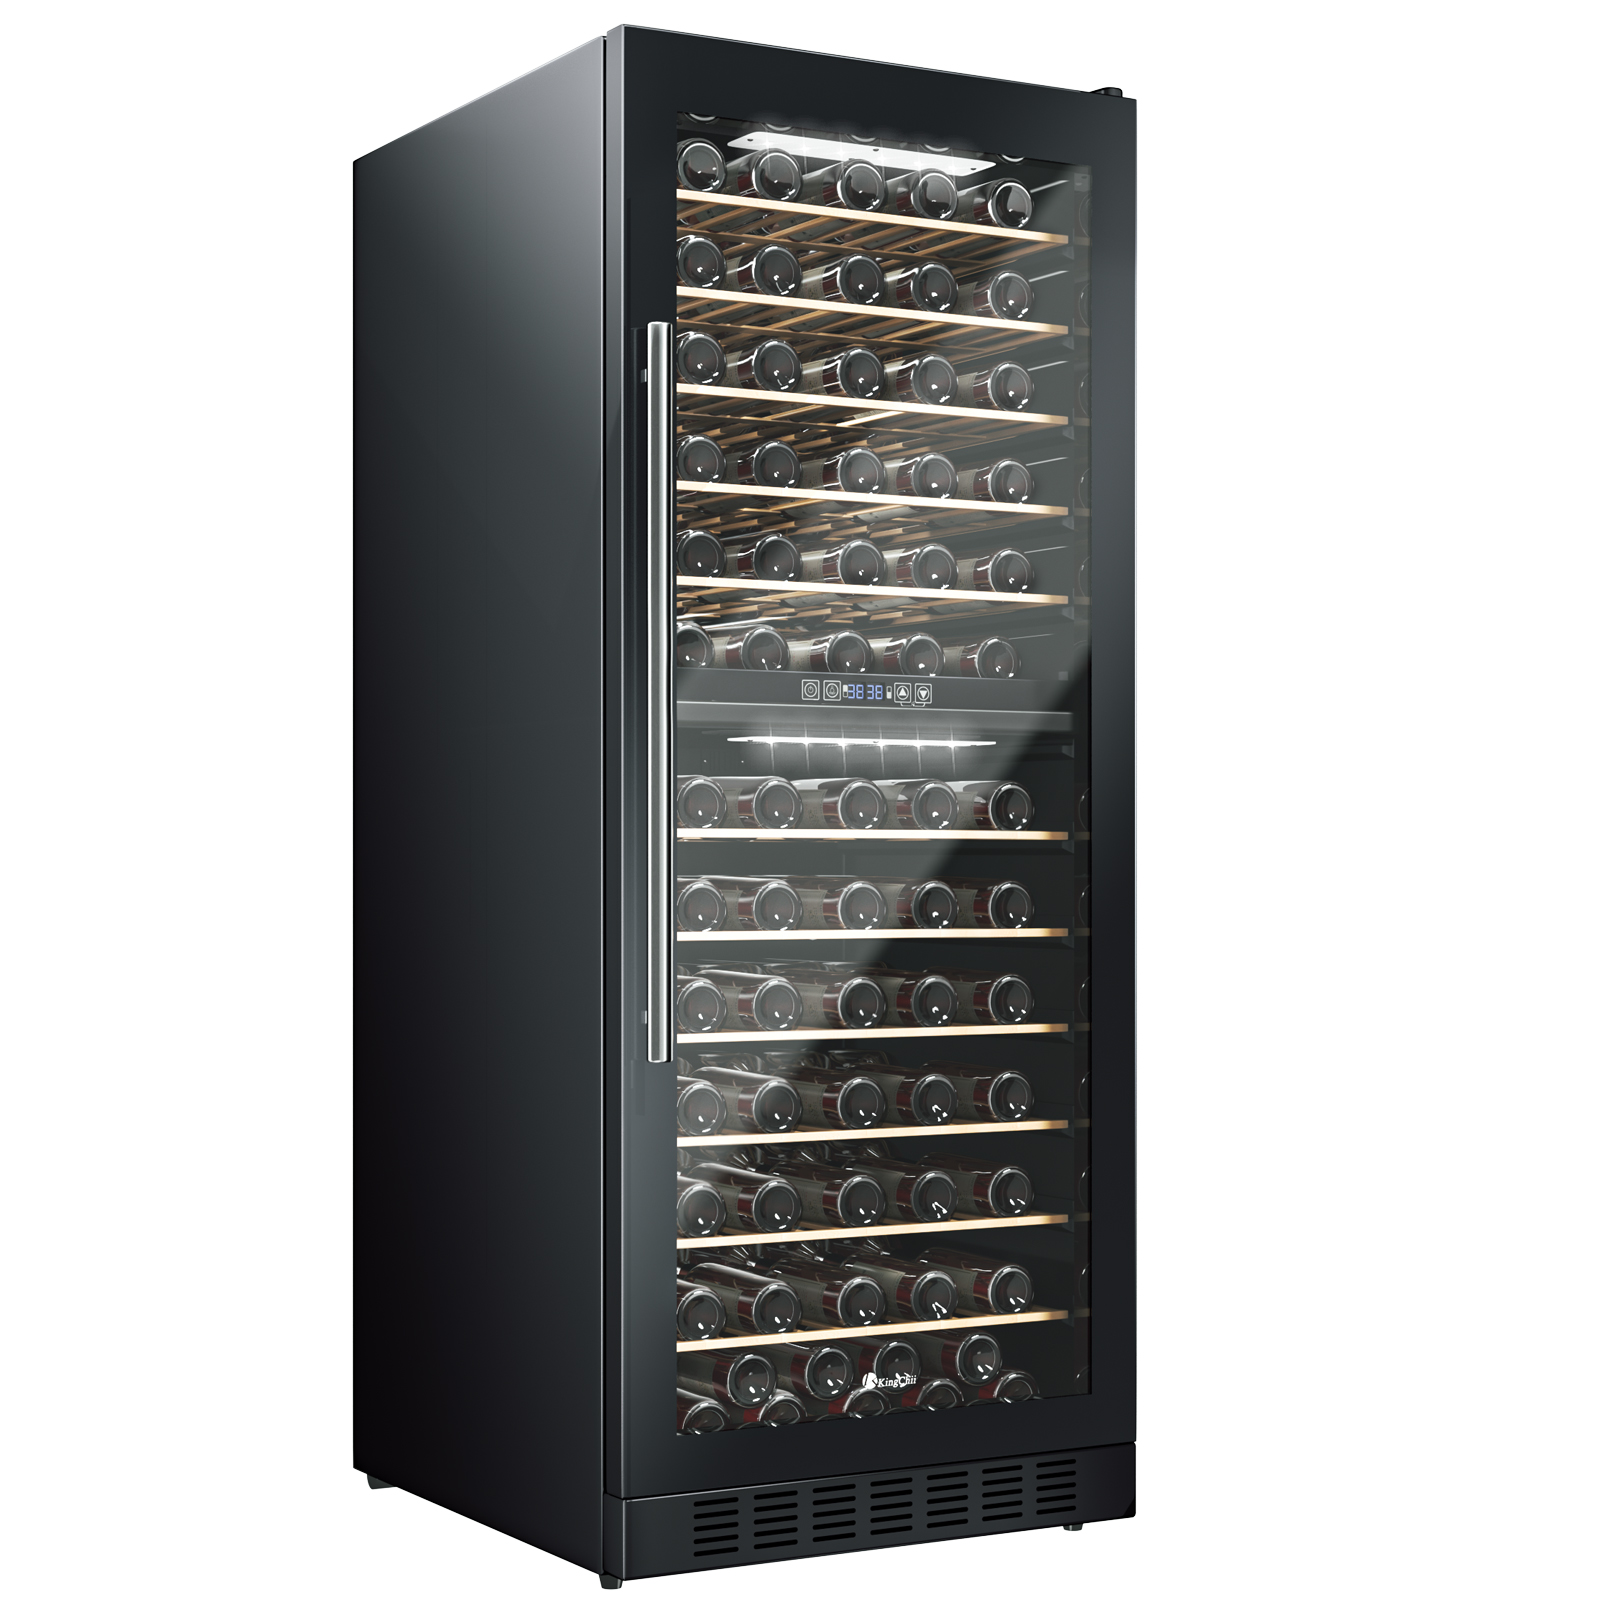 KingChii® 141 Bottles Wine Cooler Refrigerator Dual Zone Wine Fridge with Professional Compressor - Stainless Steel & Tempered Glass, Built-in or Freestanding for Home, Office, Kitchen